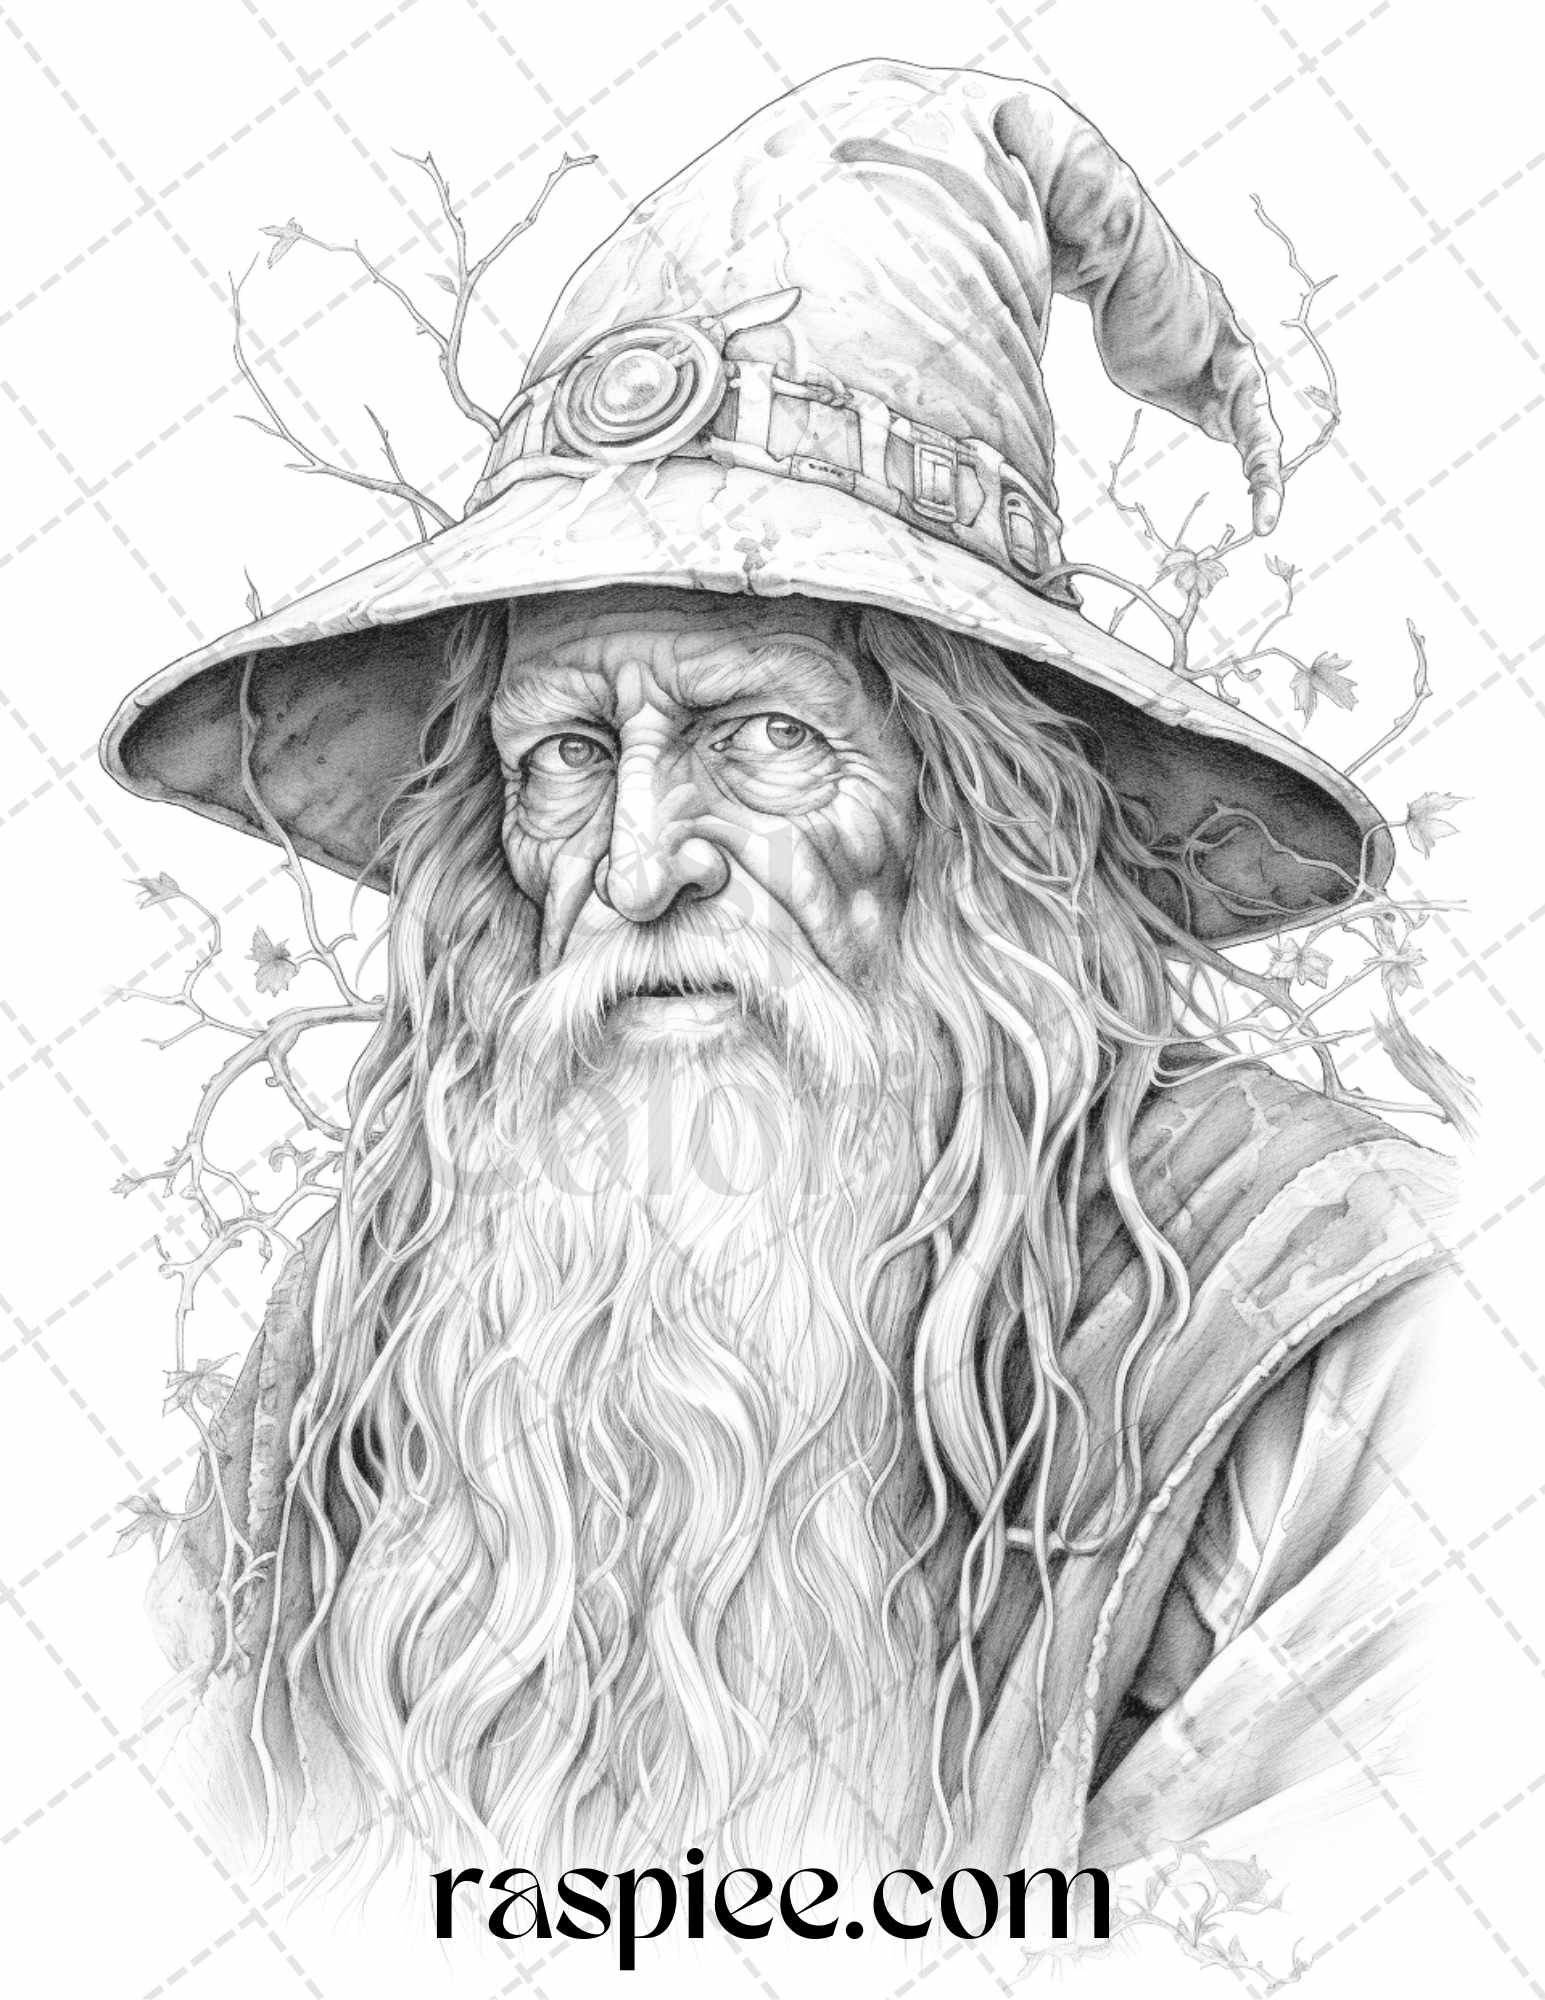 Magical Wizard Grayscale Coloring Pages, Fantays Coloring Pages for Adults, Magical Fantasy Coloring Book Printable, Enchanted fantasy coloring for adults, Wizard coloring pages for adults 